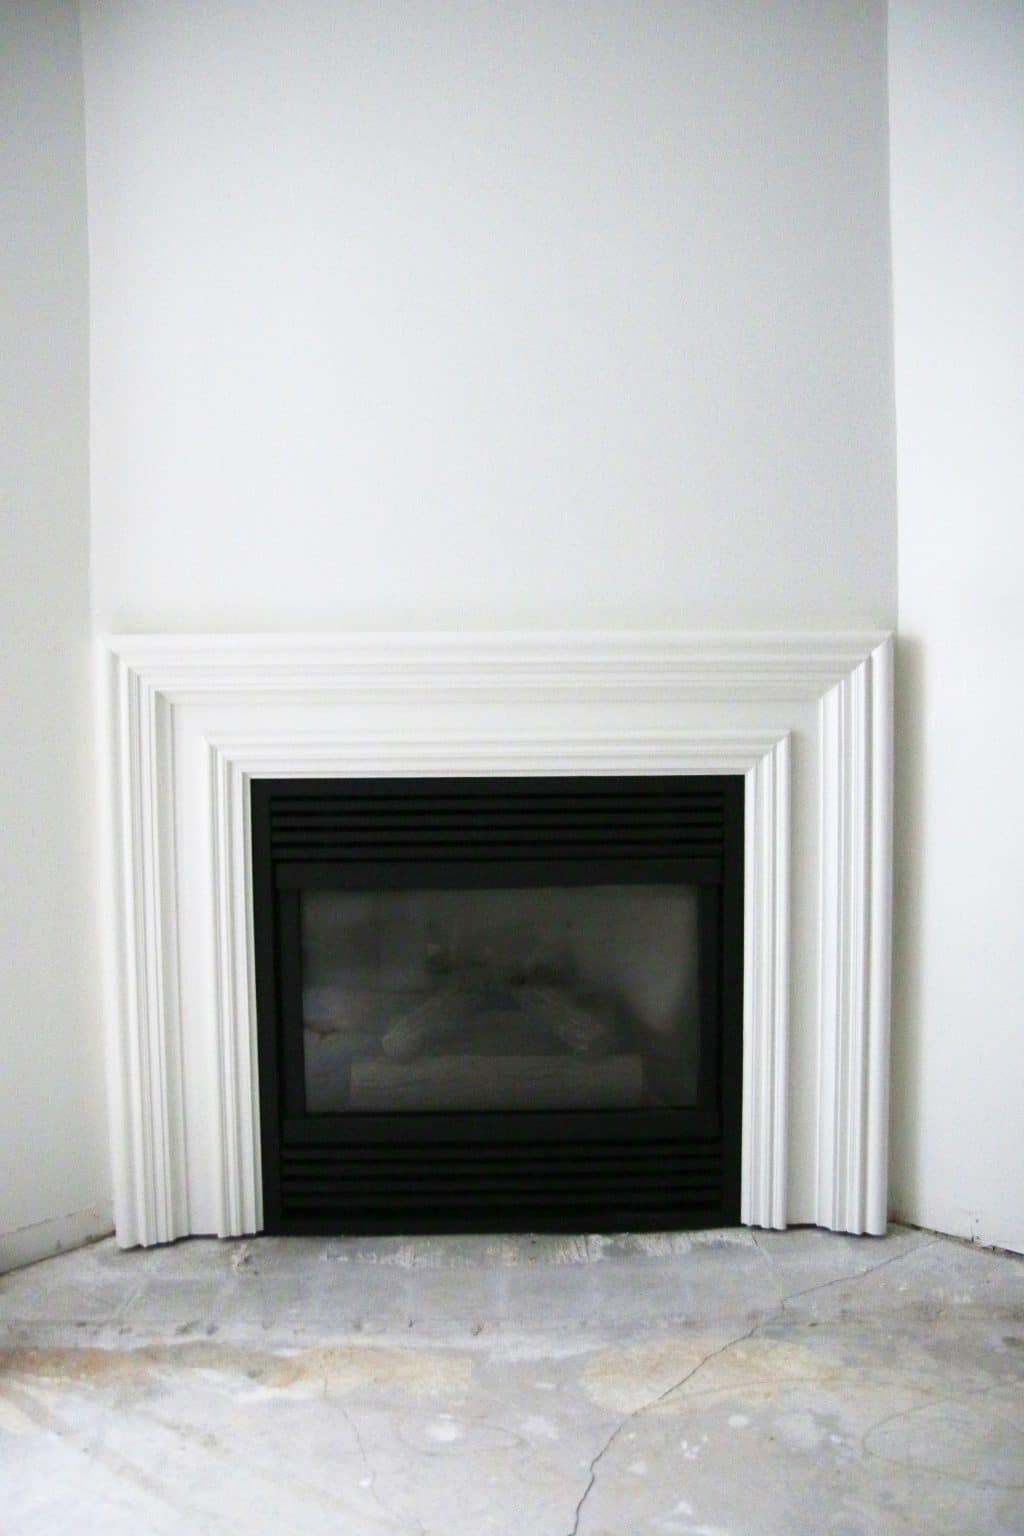 Wood Fireplace Inserts Lowes Beautiful How to Make An Outdated Fireplace Insert Look Like A Million